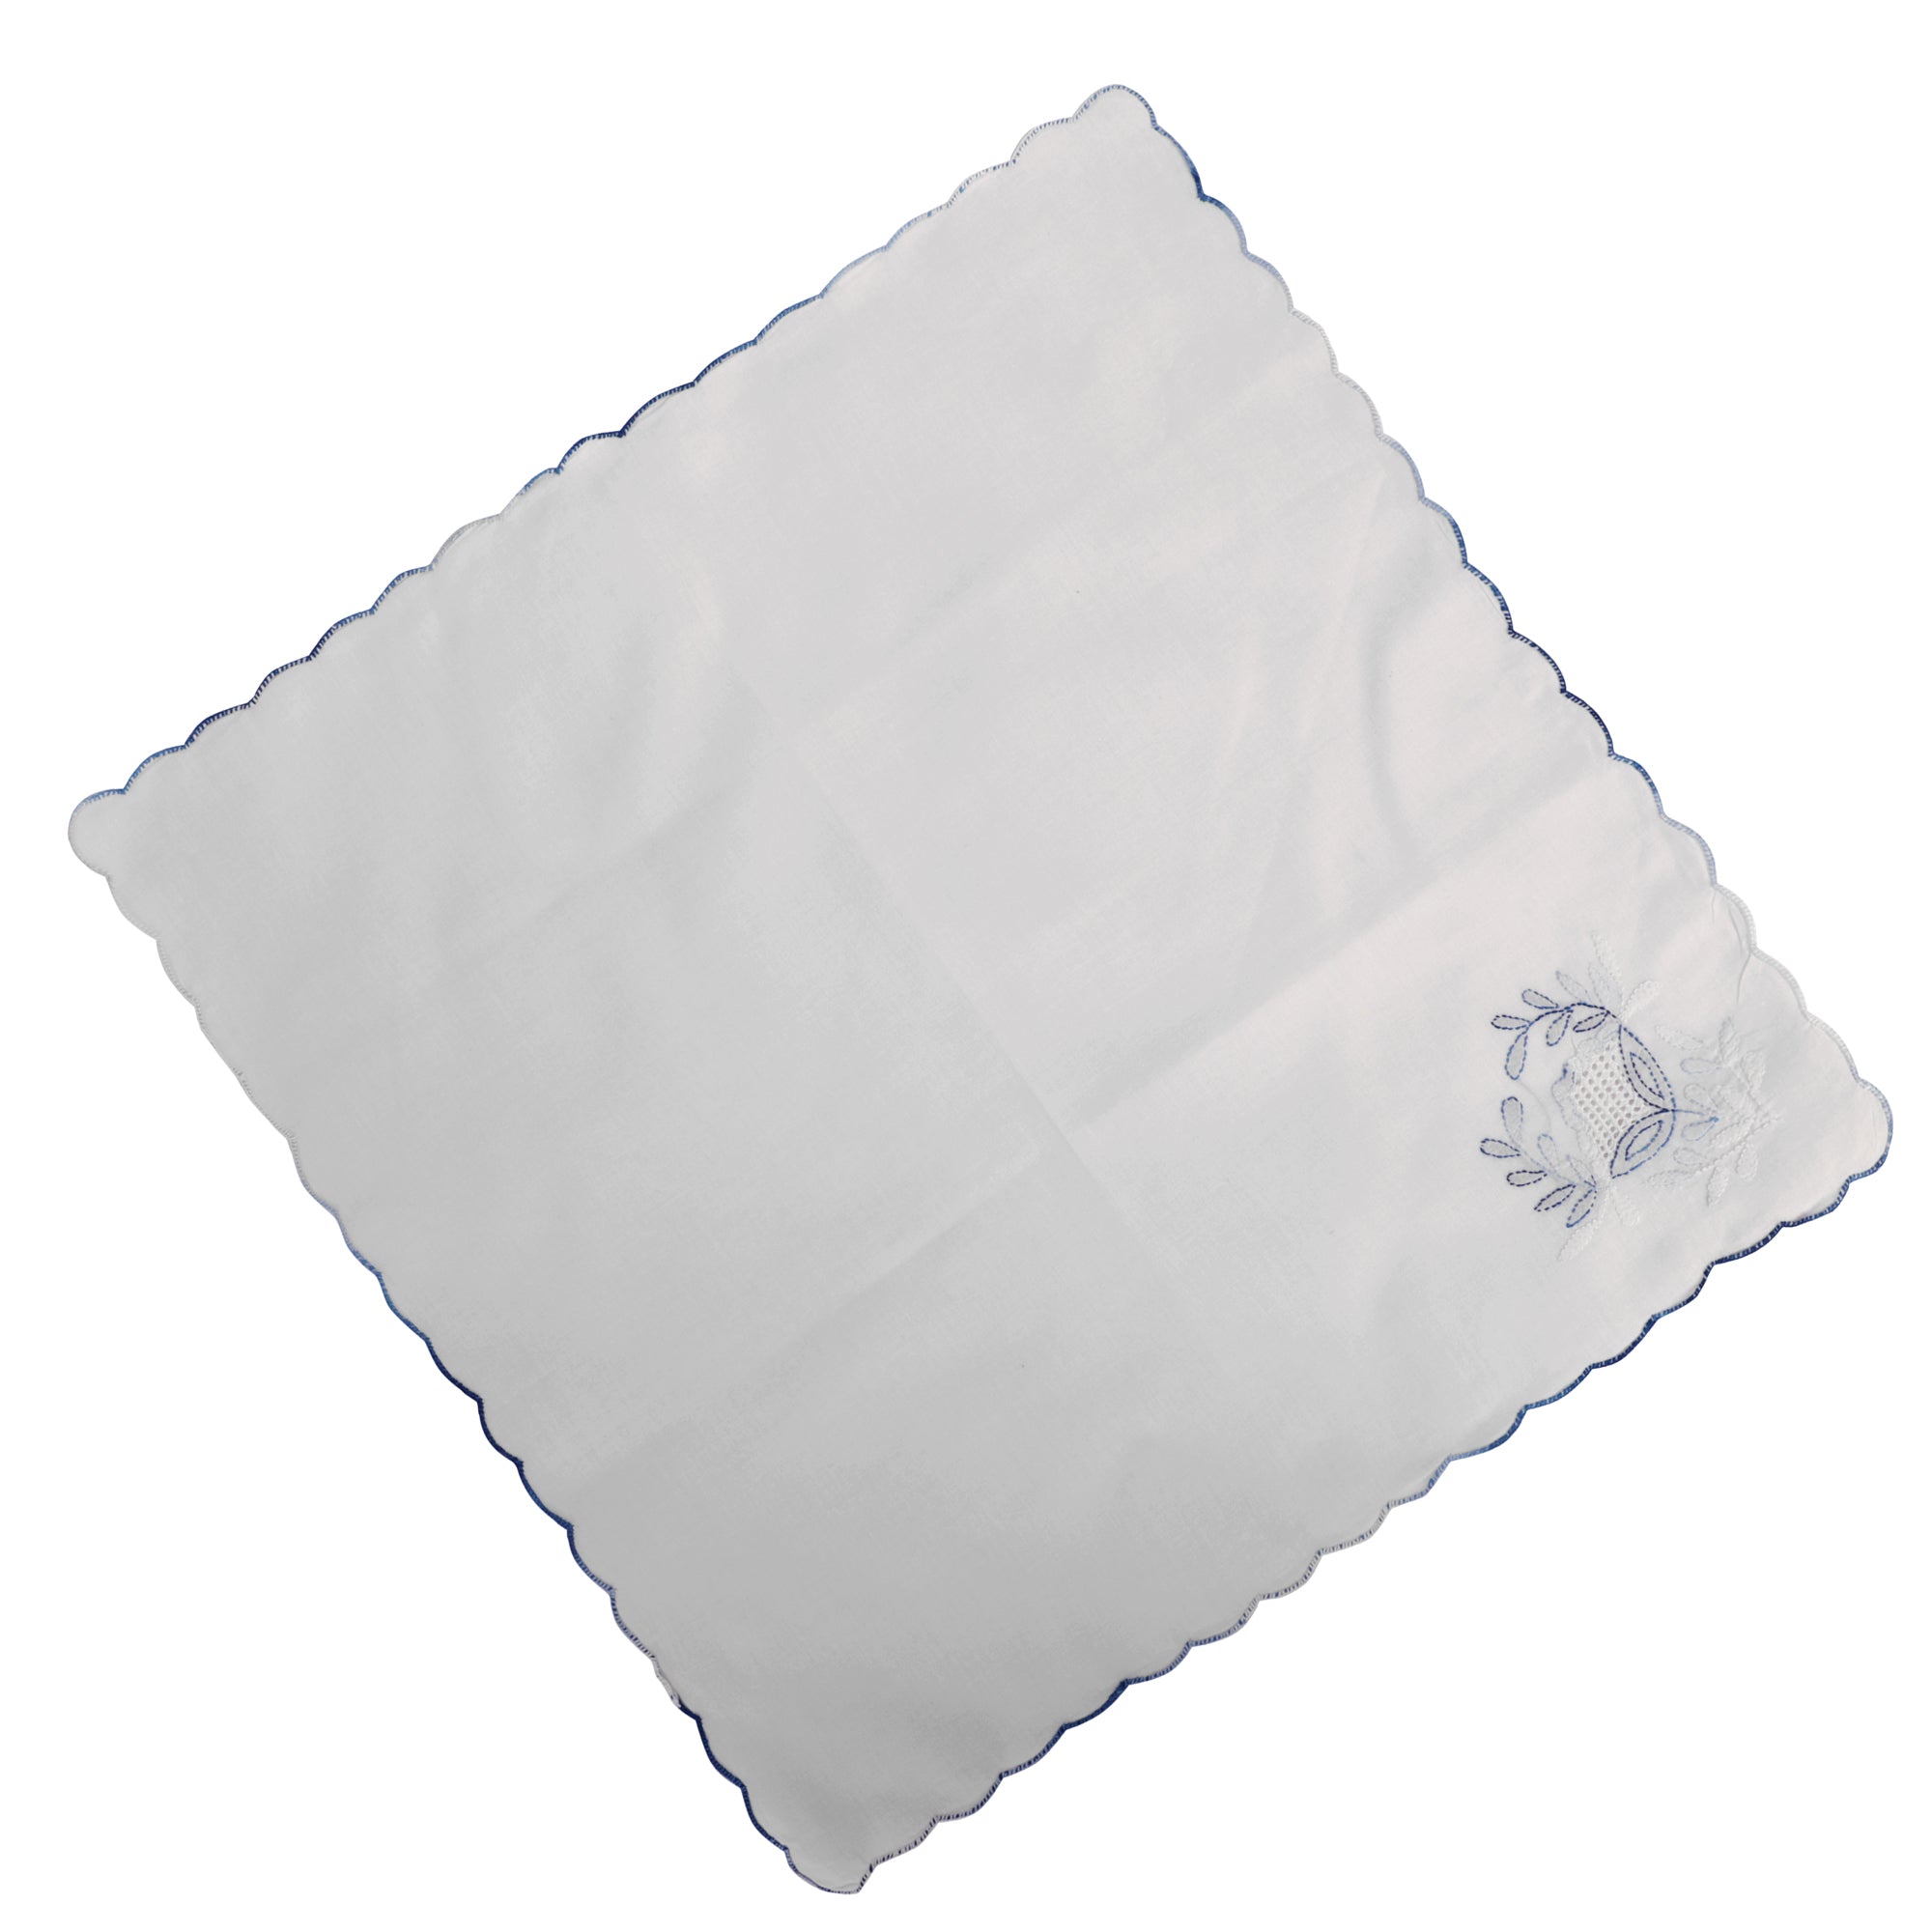 White and Blue Table Mat and Napkin Set